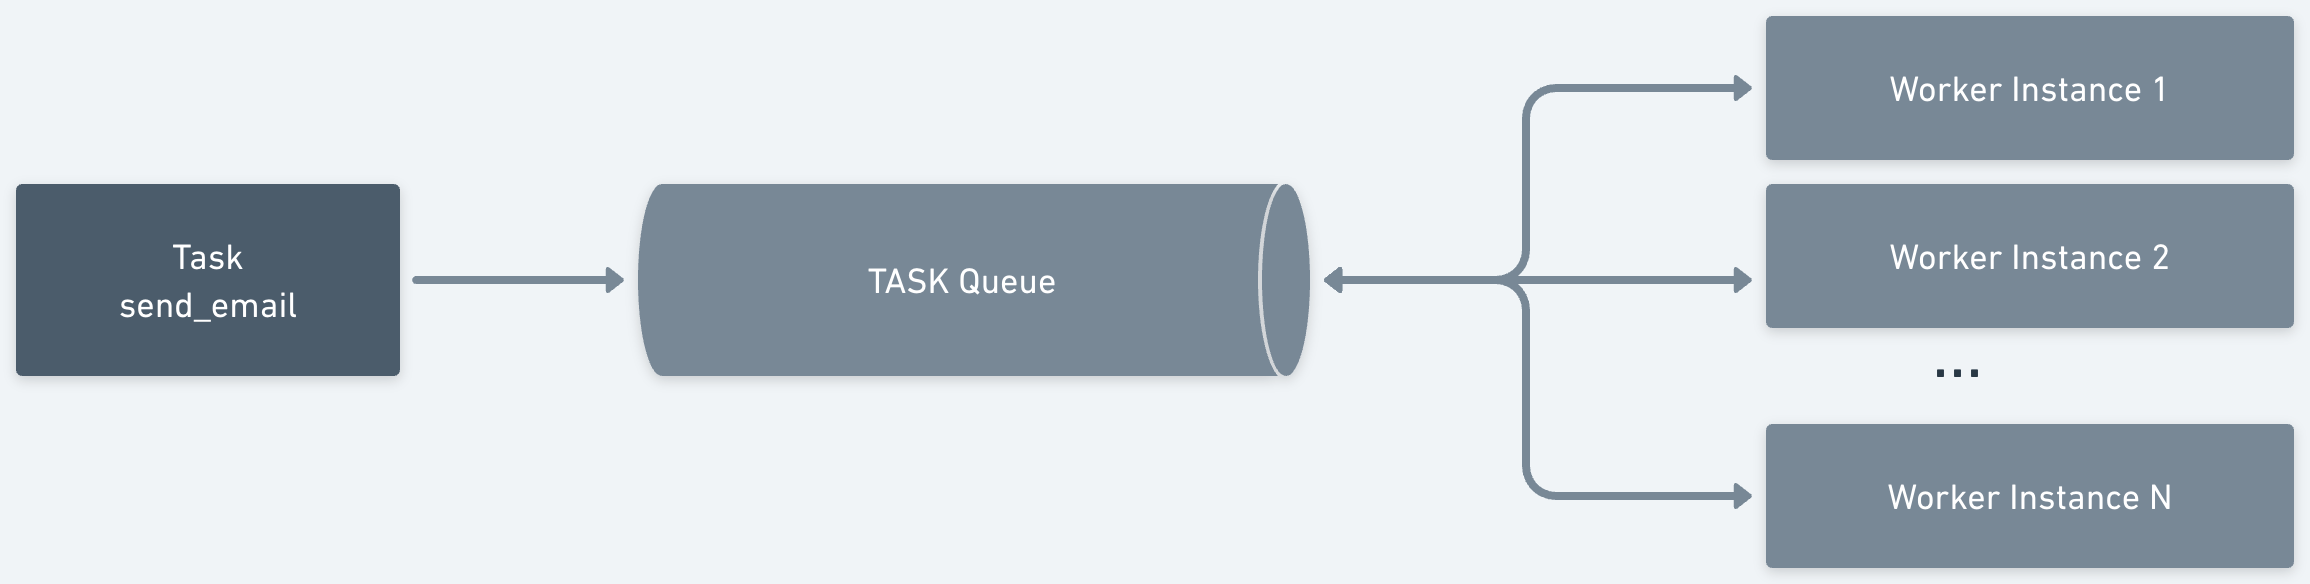 Task to domain example workflow